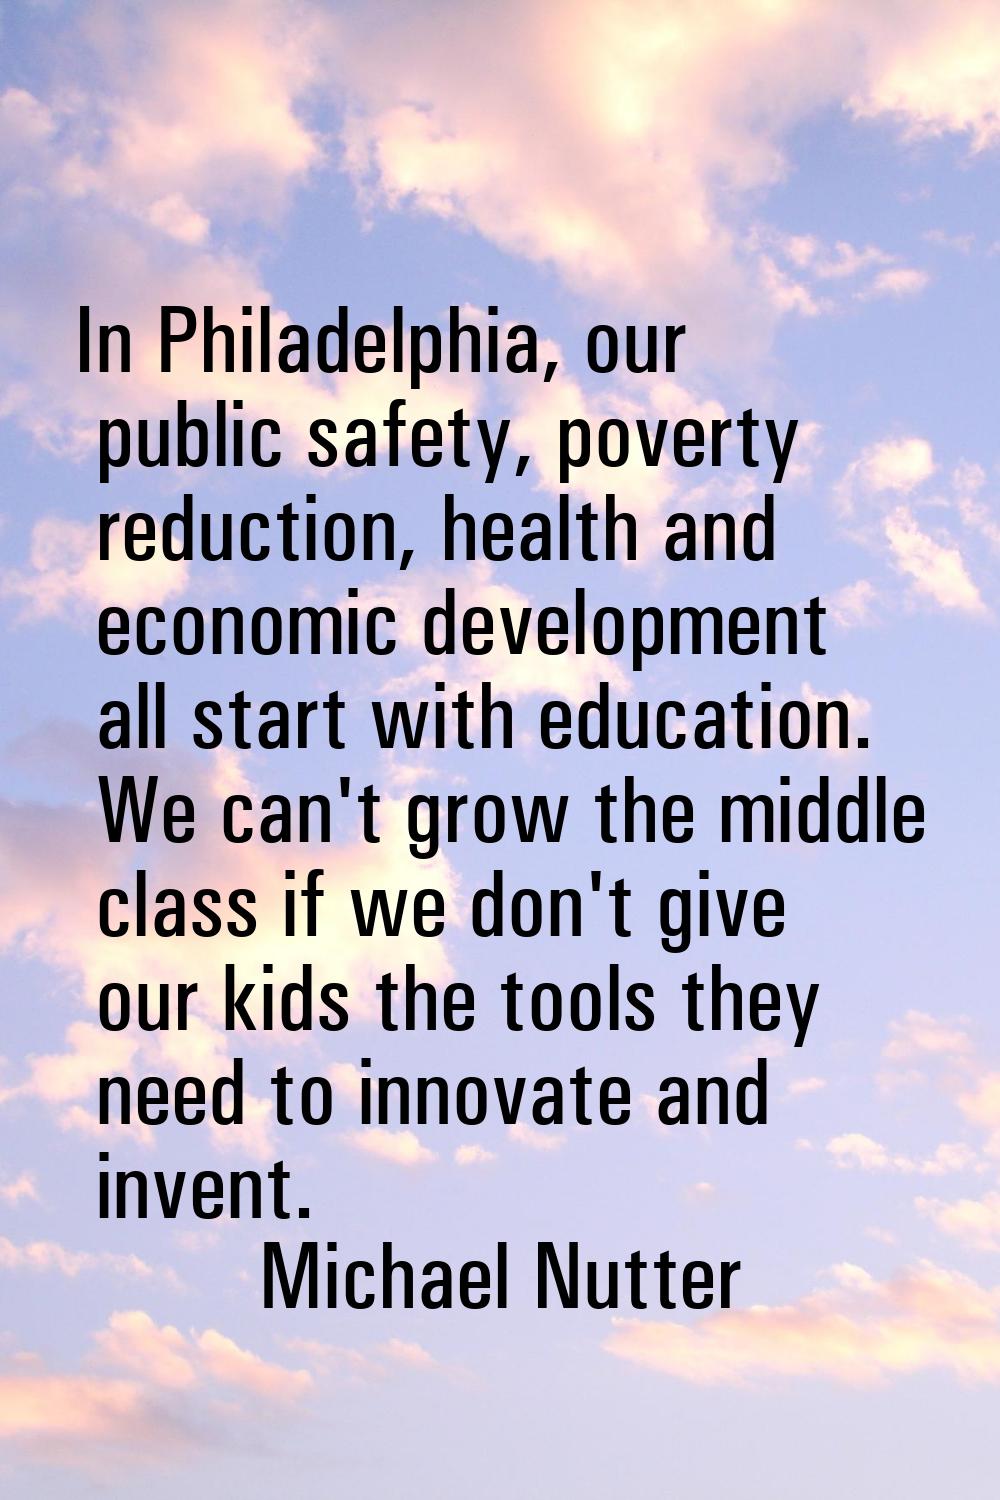 In Philadelphia, our public safety, poverty reduction, health and economic development all start wi